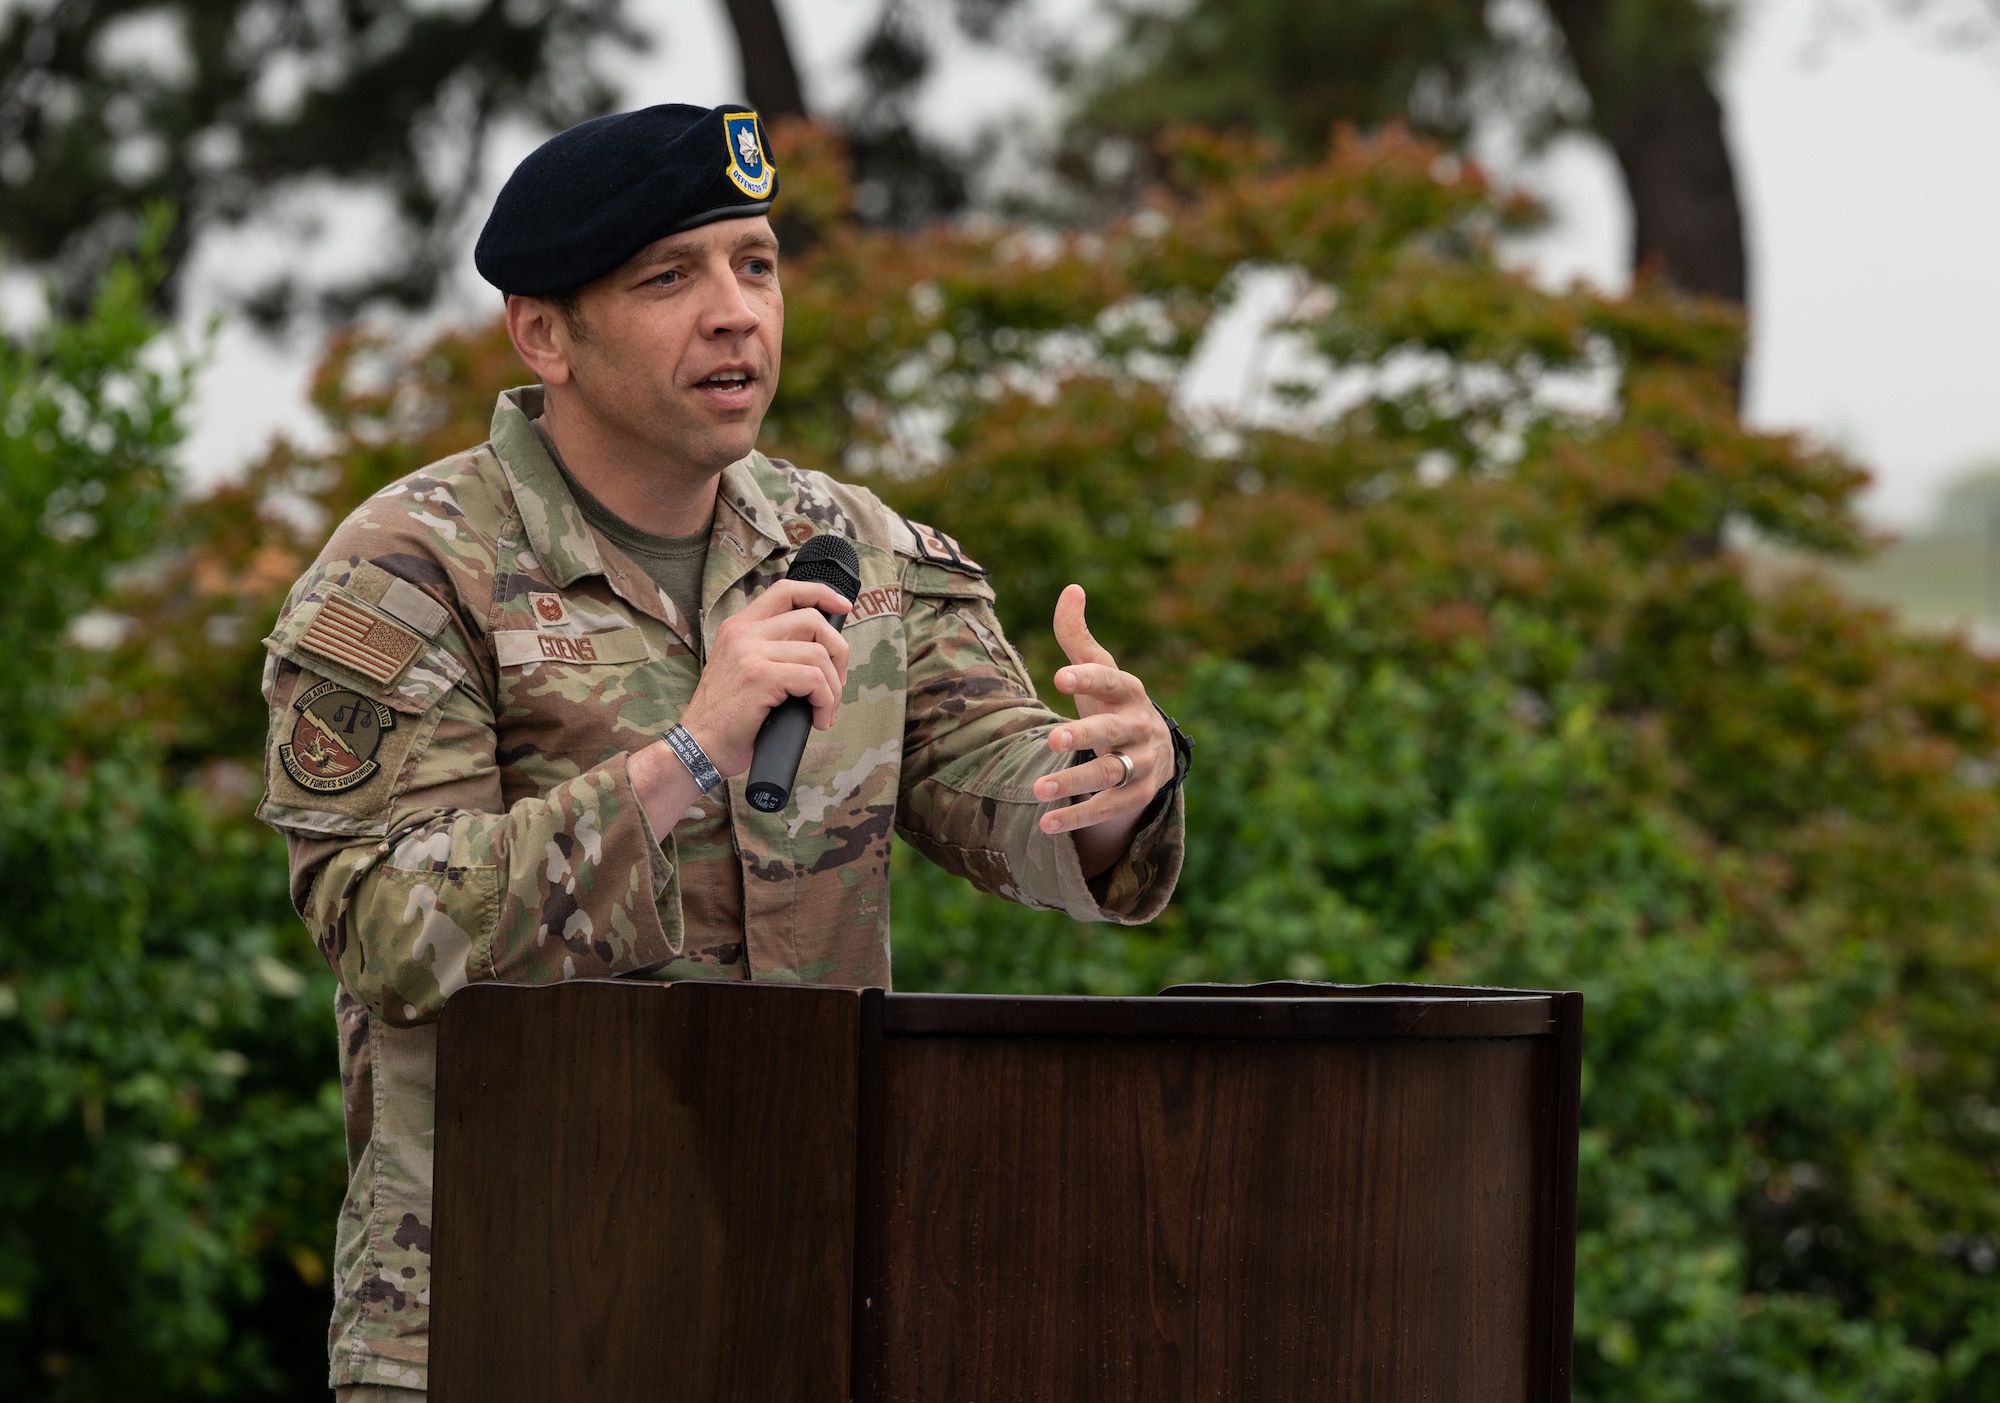 Lt. Col. Jesse “Sheriff” Goens, 8th Security Forces Squadron commander, gives remarks during the 2023 National Police Week opening ceremony at Kunsan Air Base, Republic of Korea, May 22, 2023. National Police Week honors law enforcement members, specifically those who have their lives in the line of duty. (U.S. Air Force photo by Staff Sgt. Sadie Colbert)